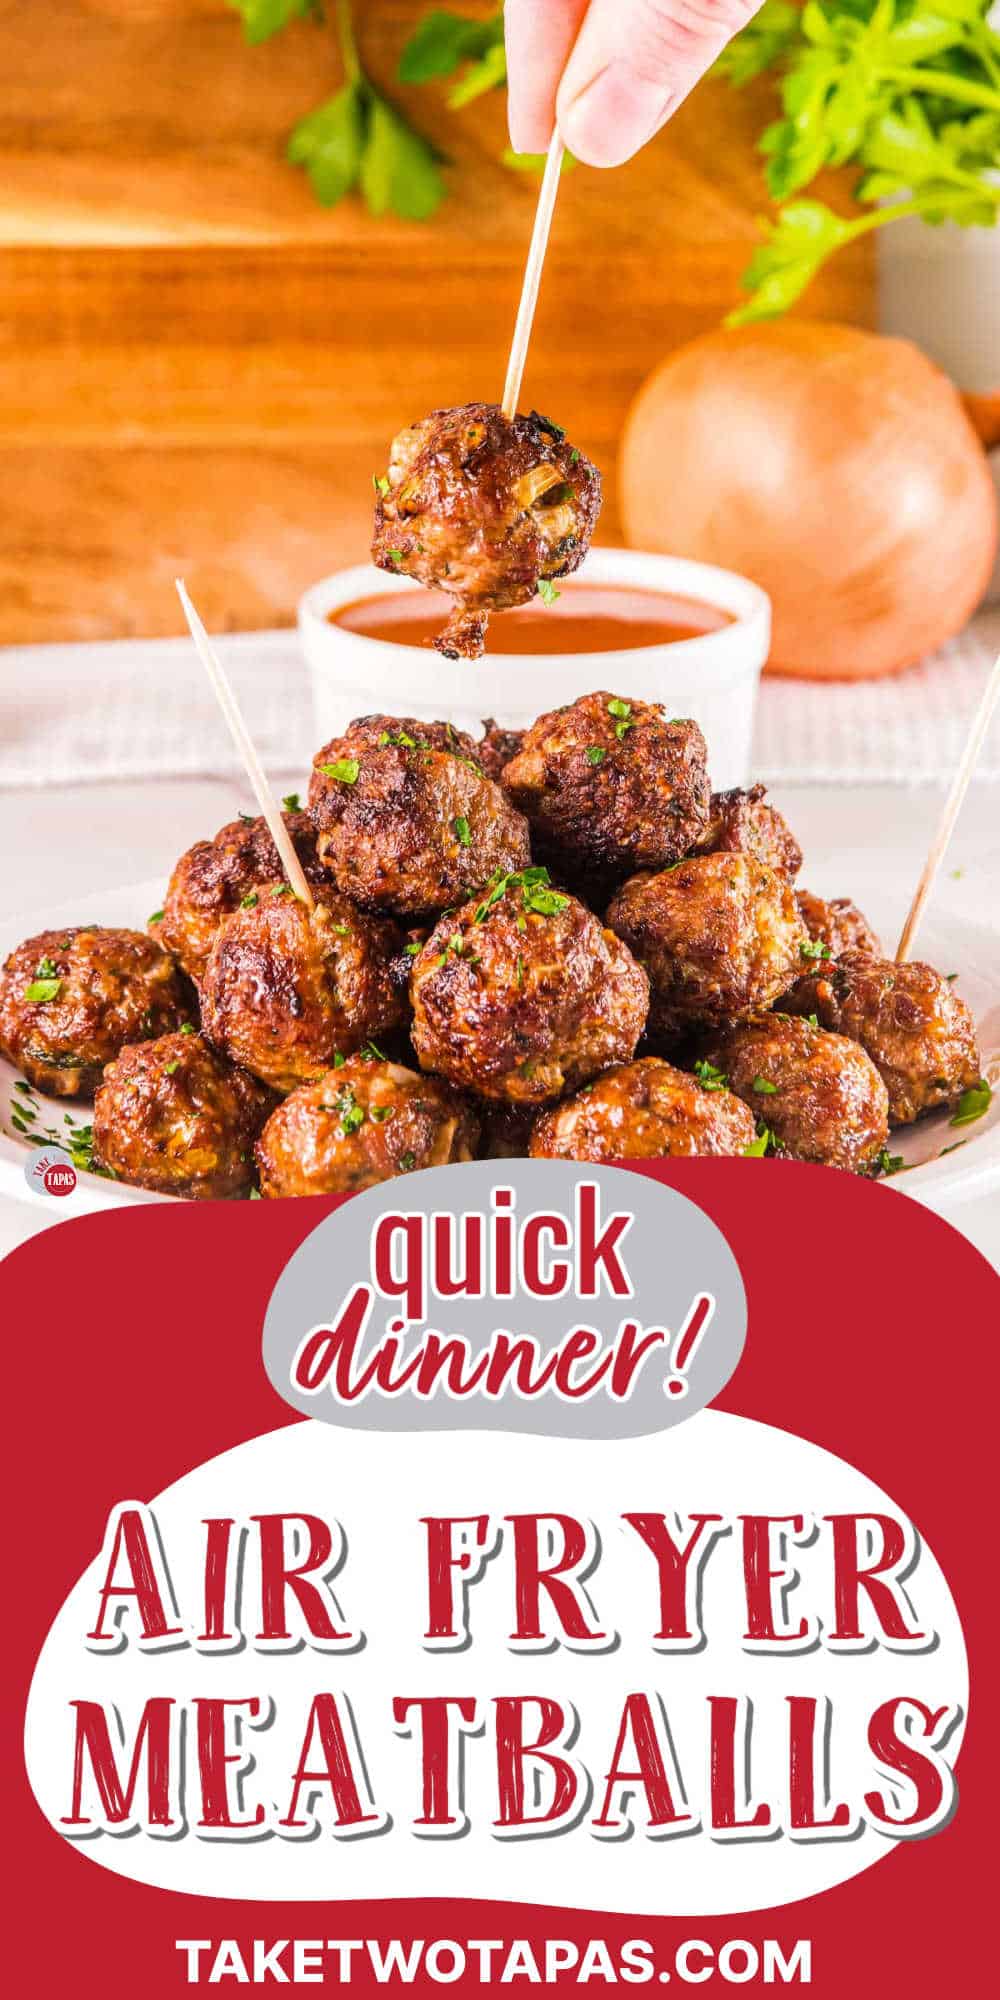 meatballs on a plate with red banner with text